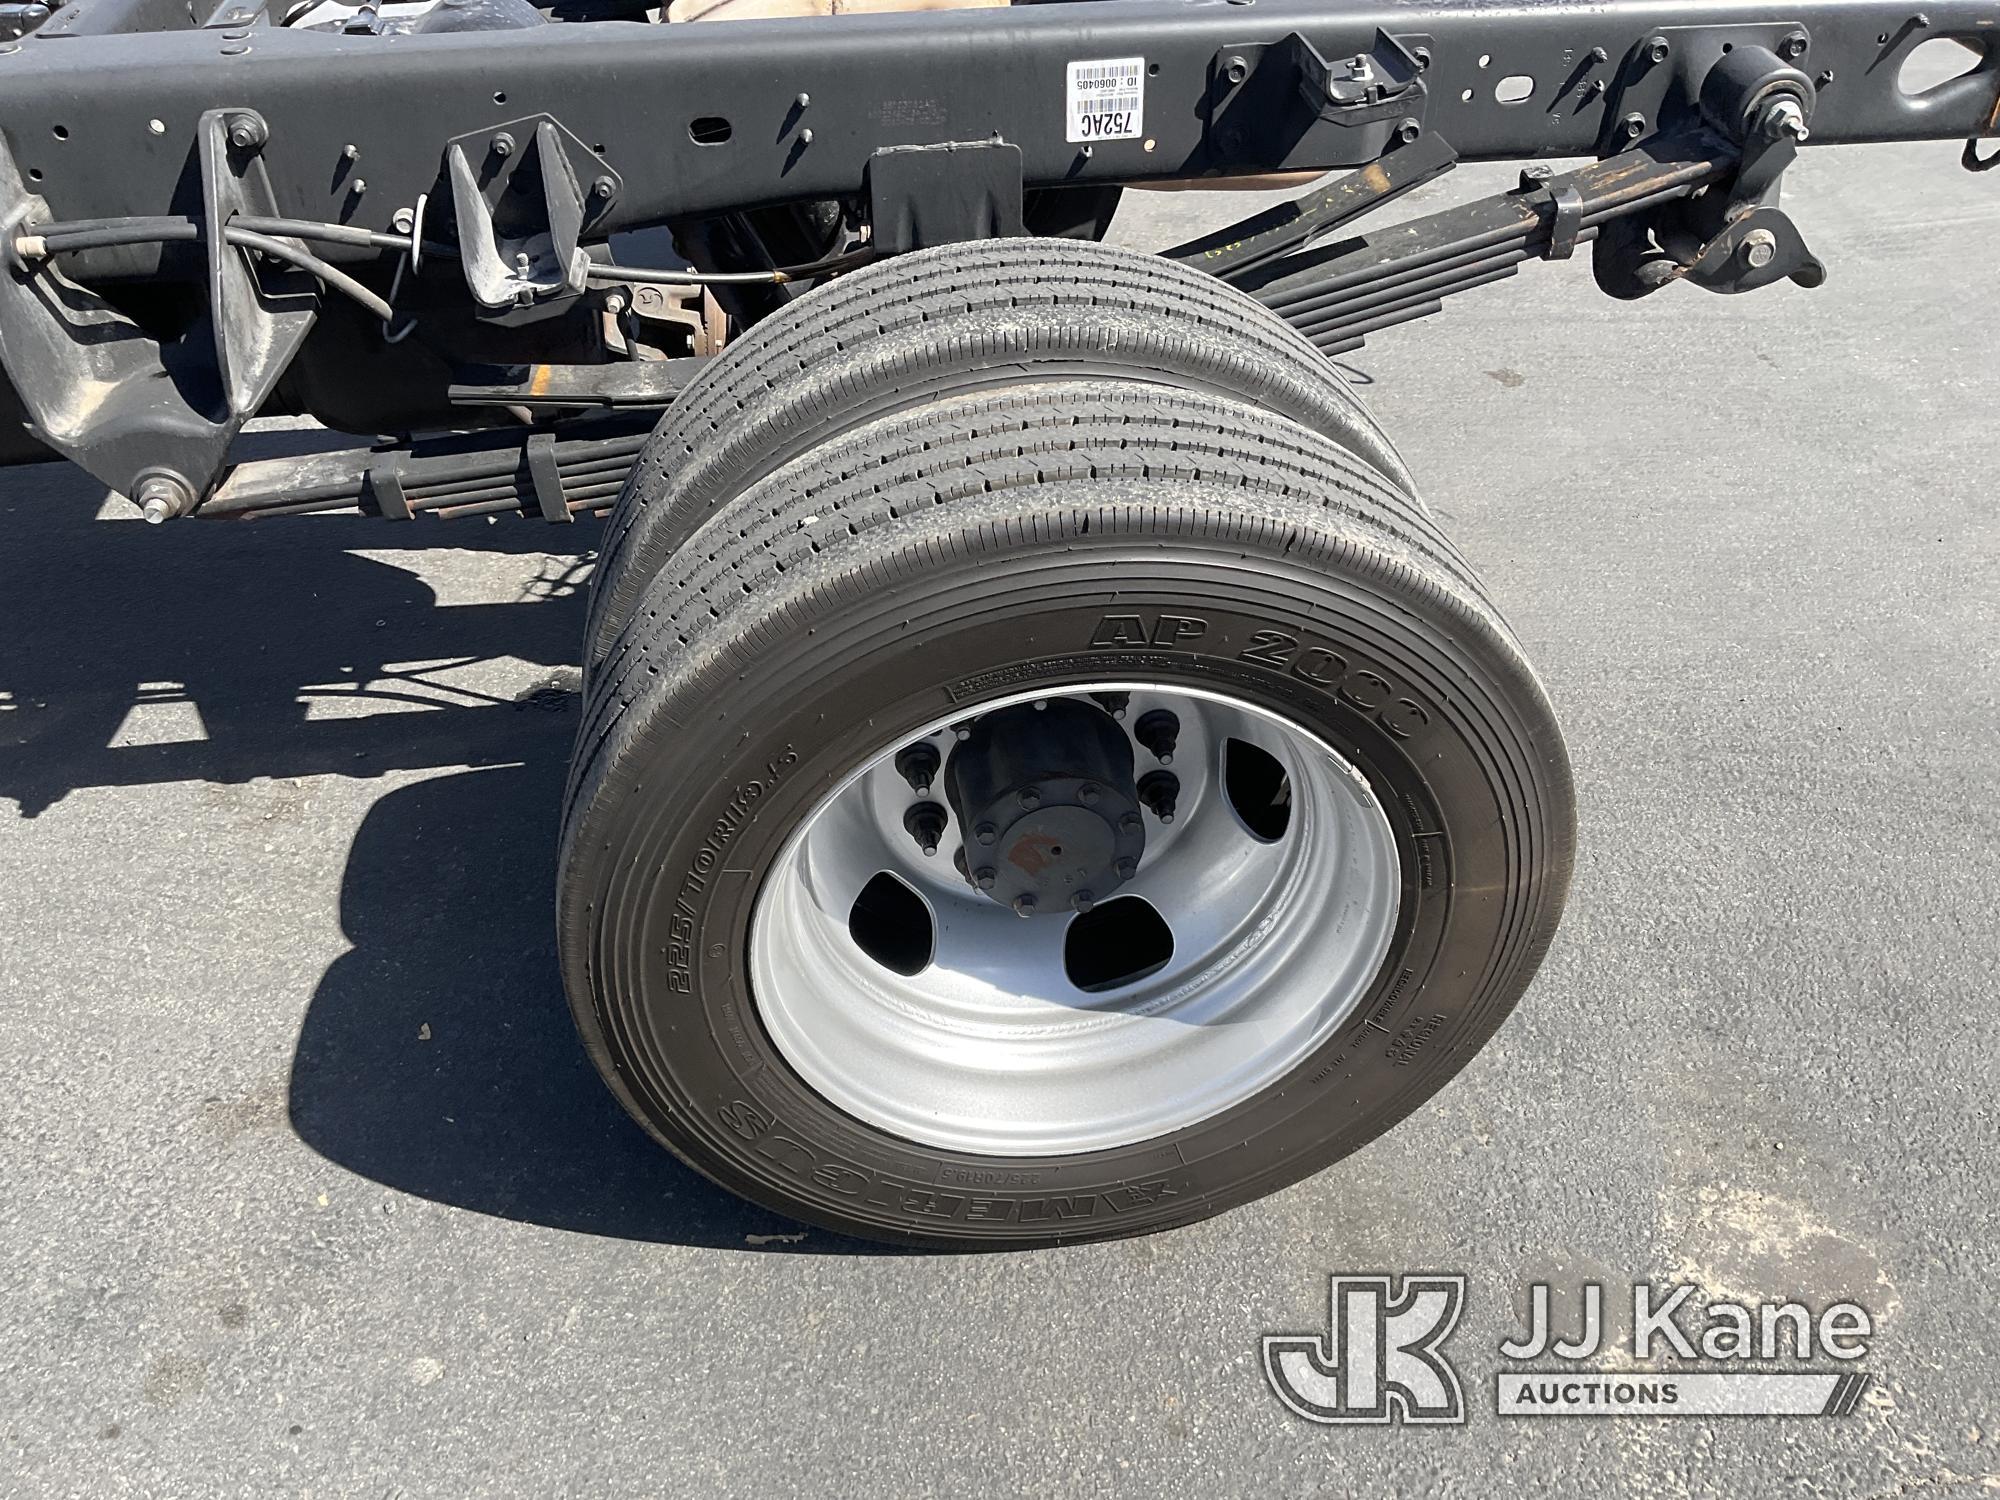 (Jurupa Valley, CA) 2013 RAM 5500 Cab & Chassis Runs & Moves, Cracked Windshield, Air Bag Light On,